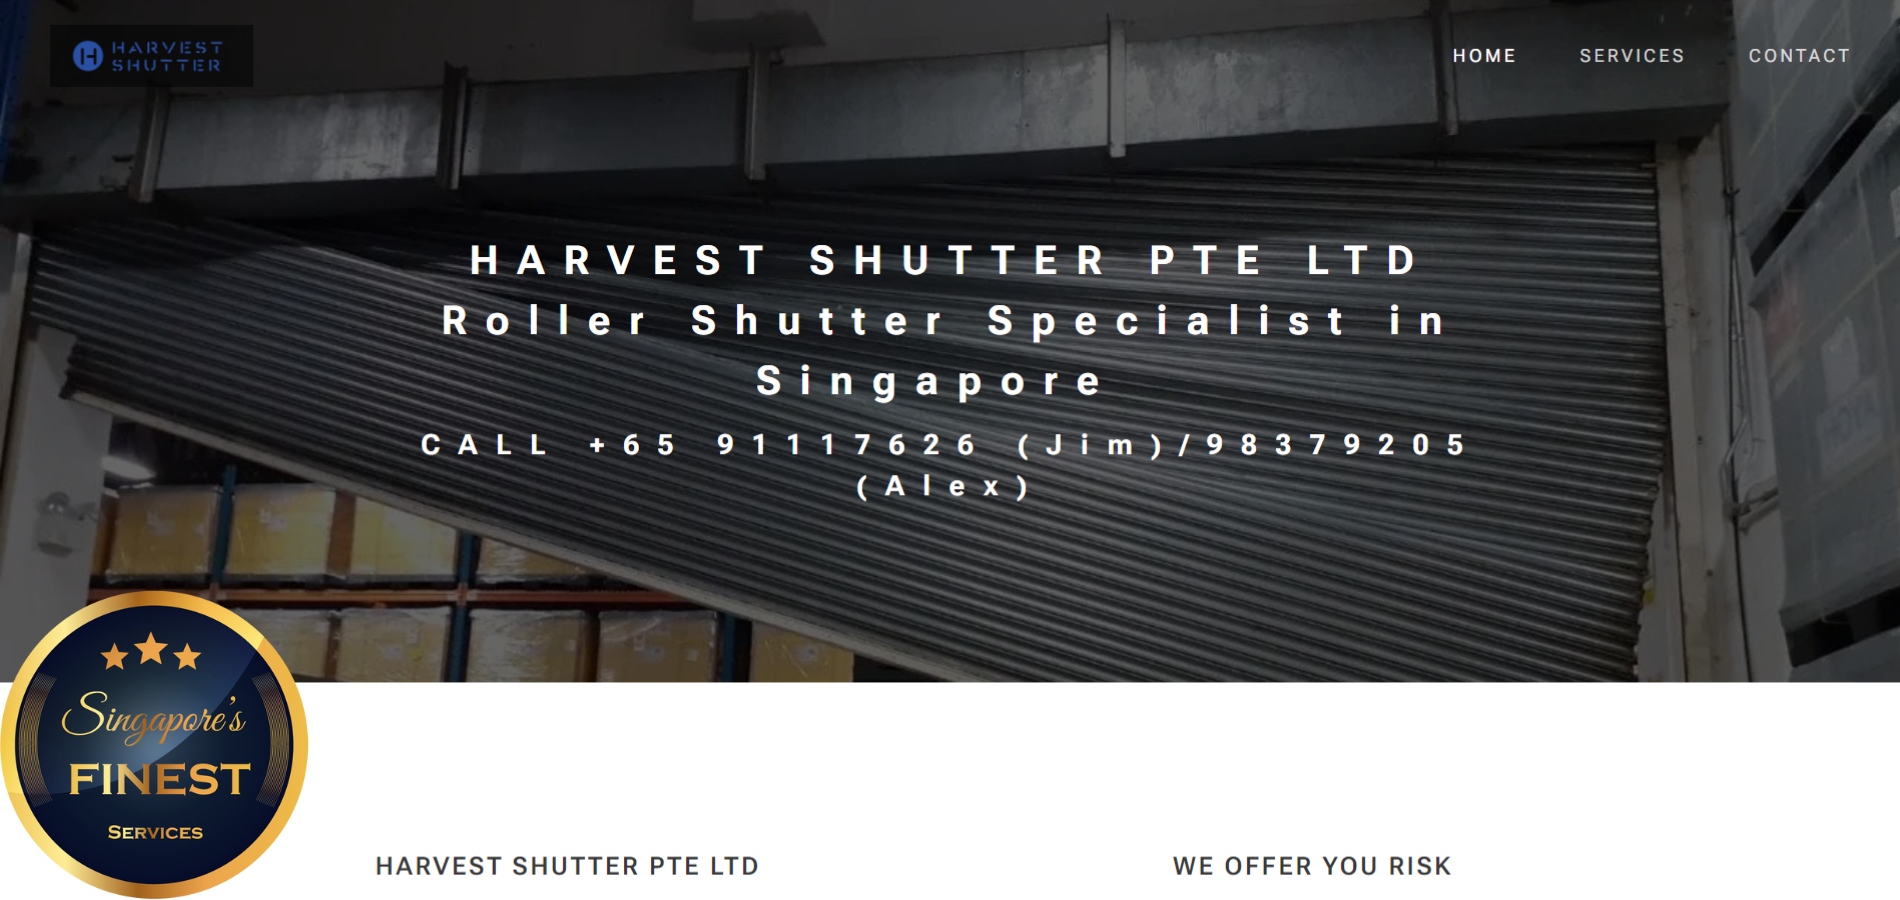 The Finest Roller Shutters in Singapore